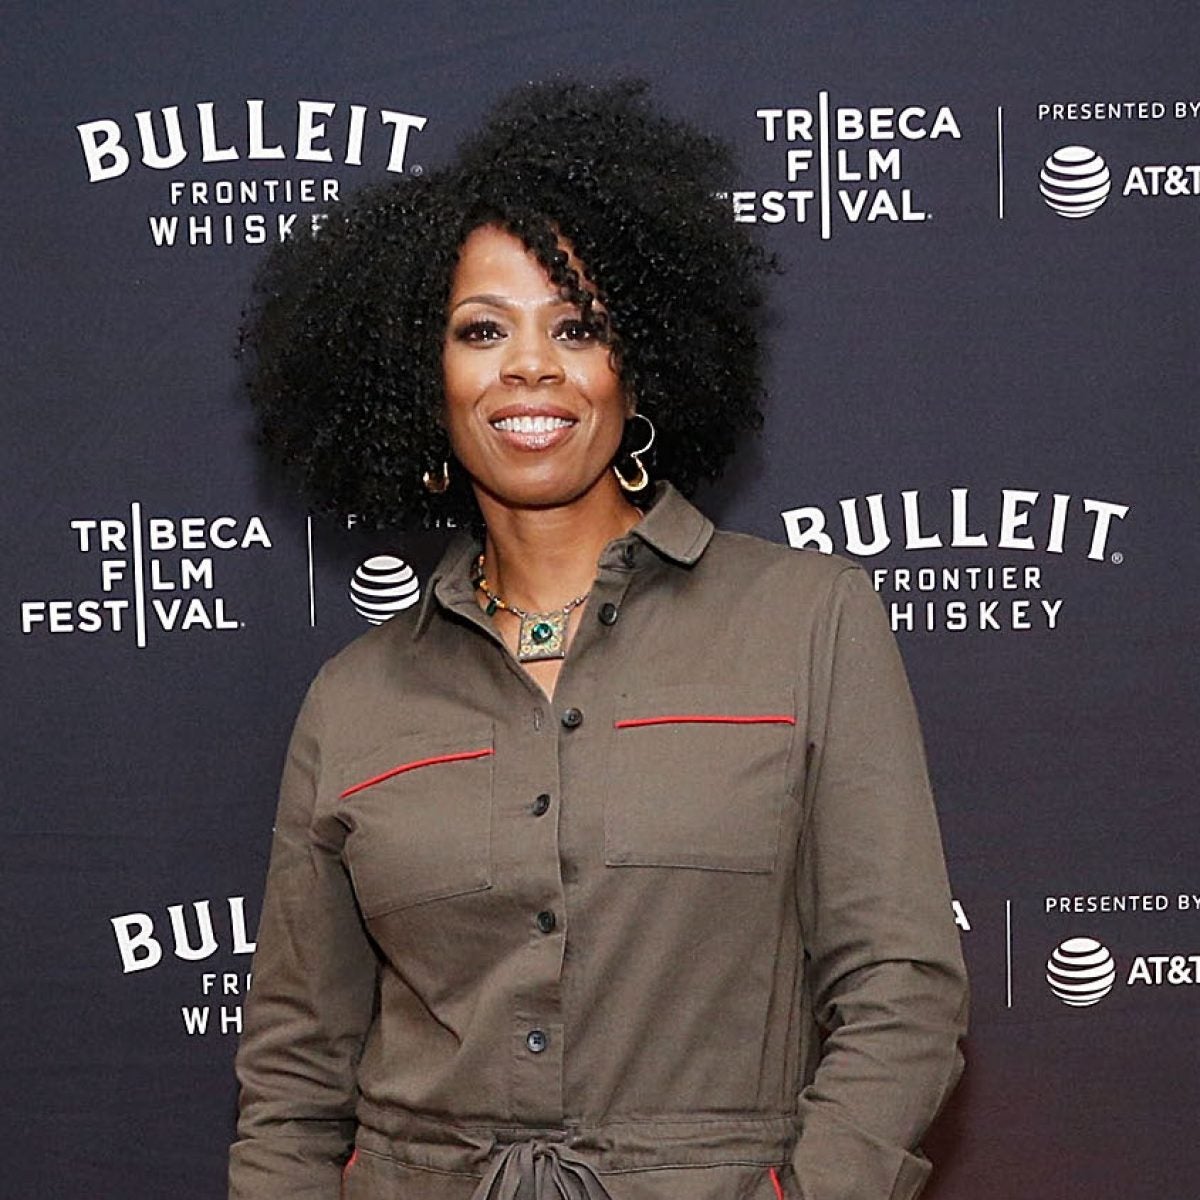 Kim Wayans 'Looked To Her Brothers' Instead Of Trusting Her Own Voice